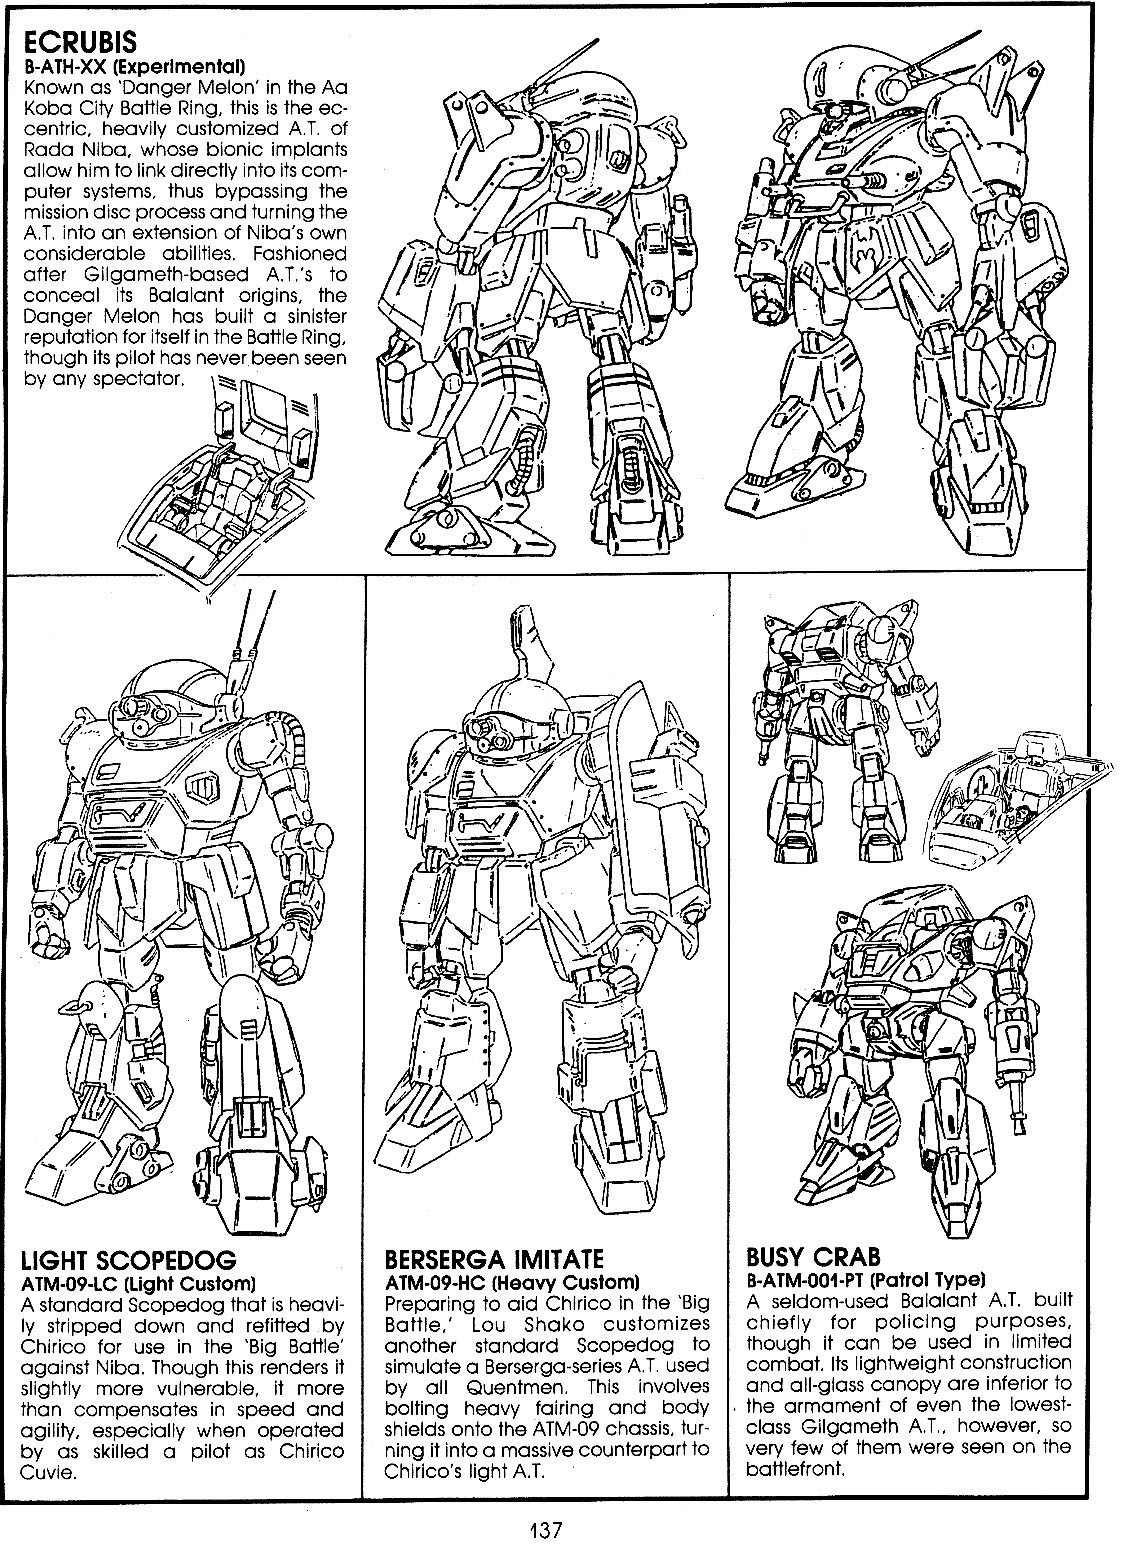 VOTOMS Viewing Guide 137